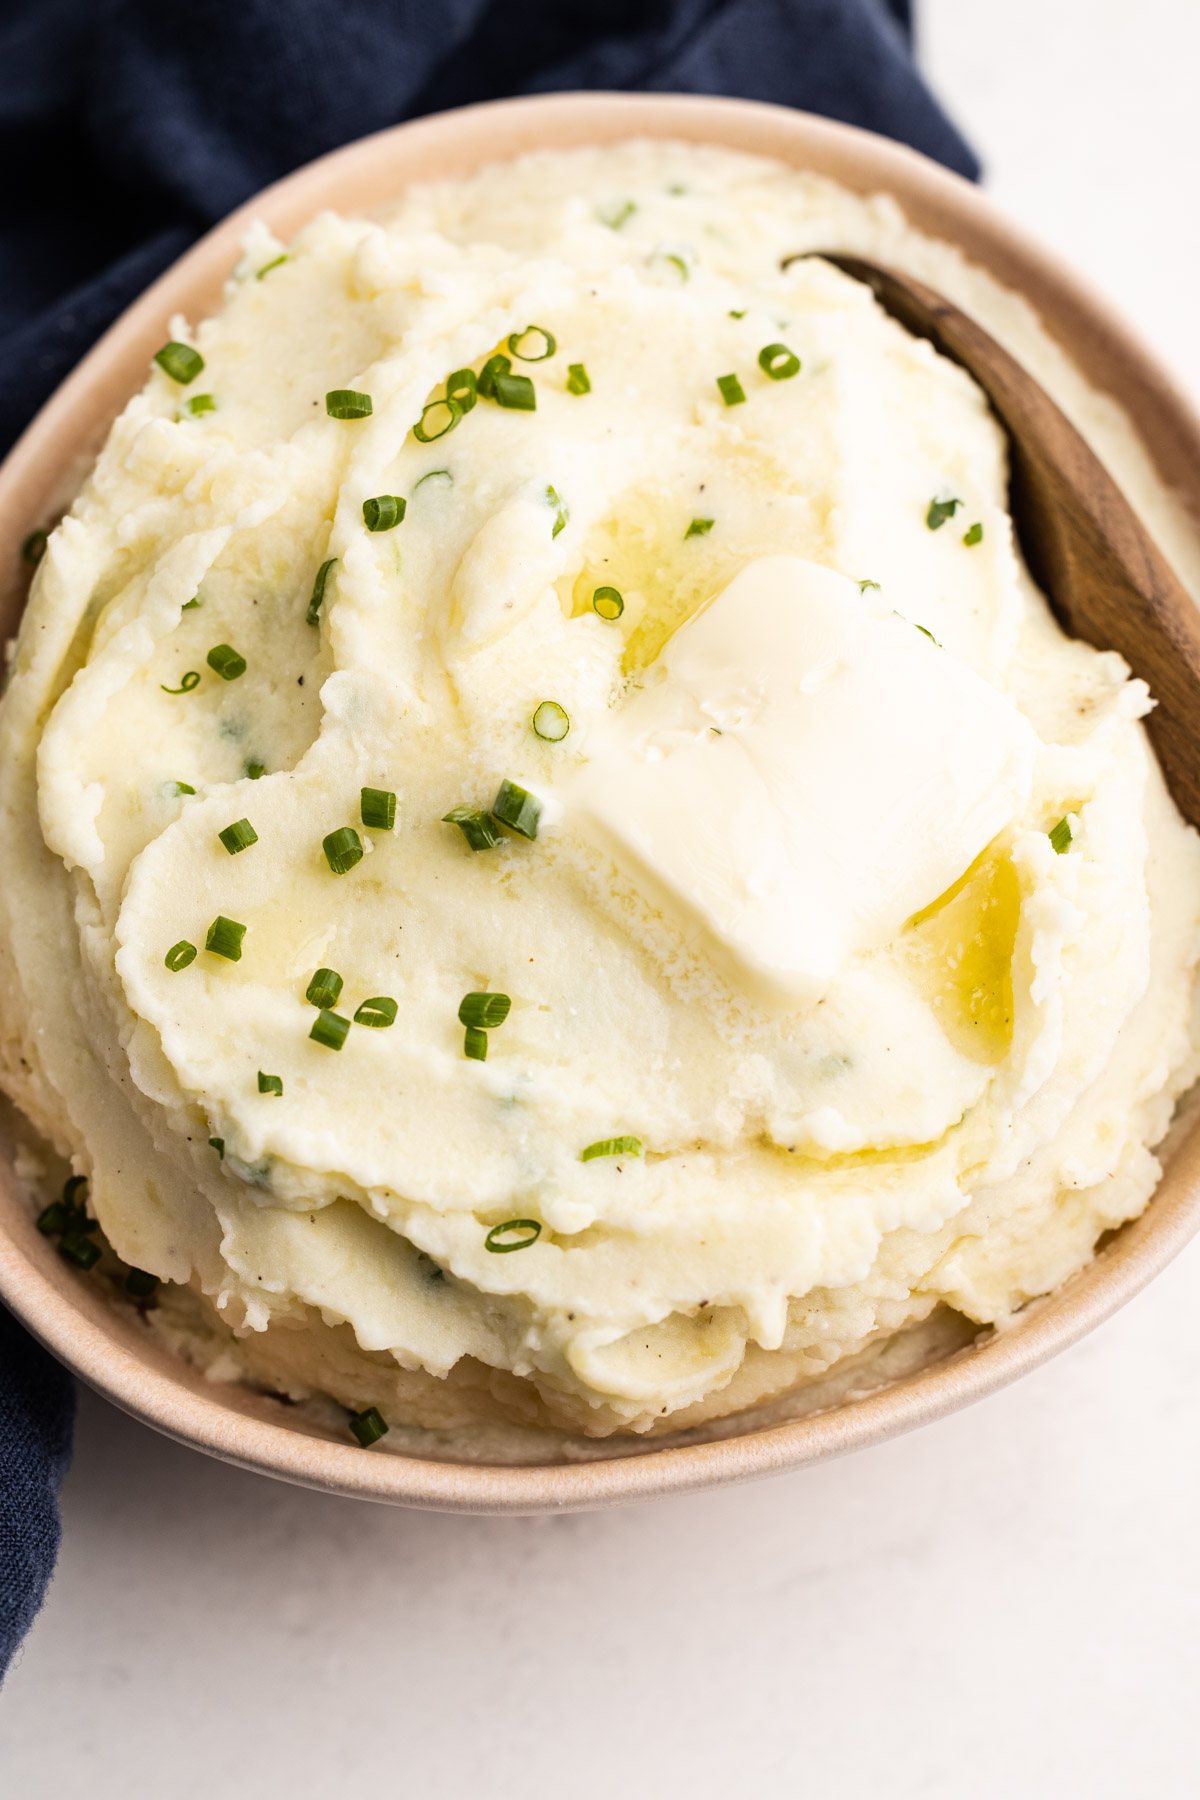 Sour cream and onion mashed potatoes.